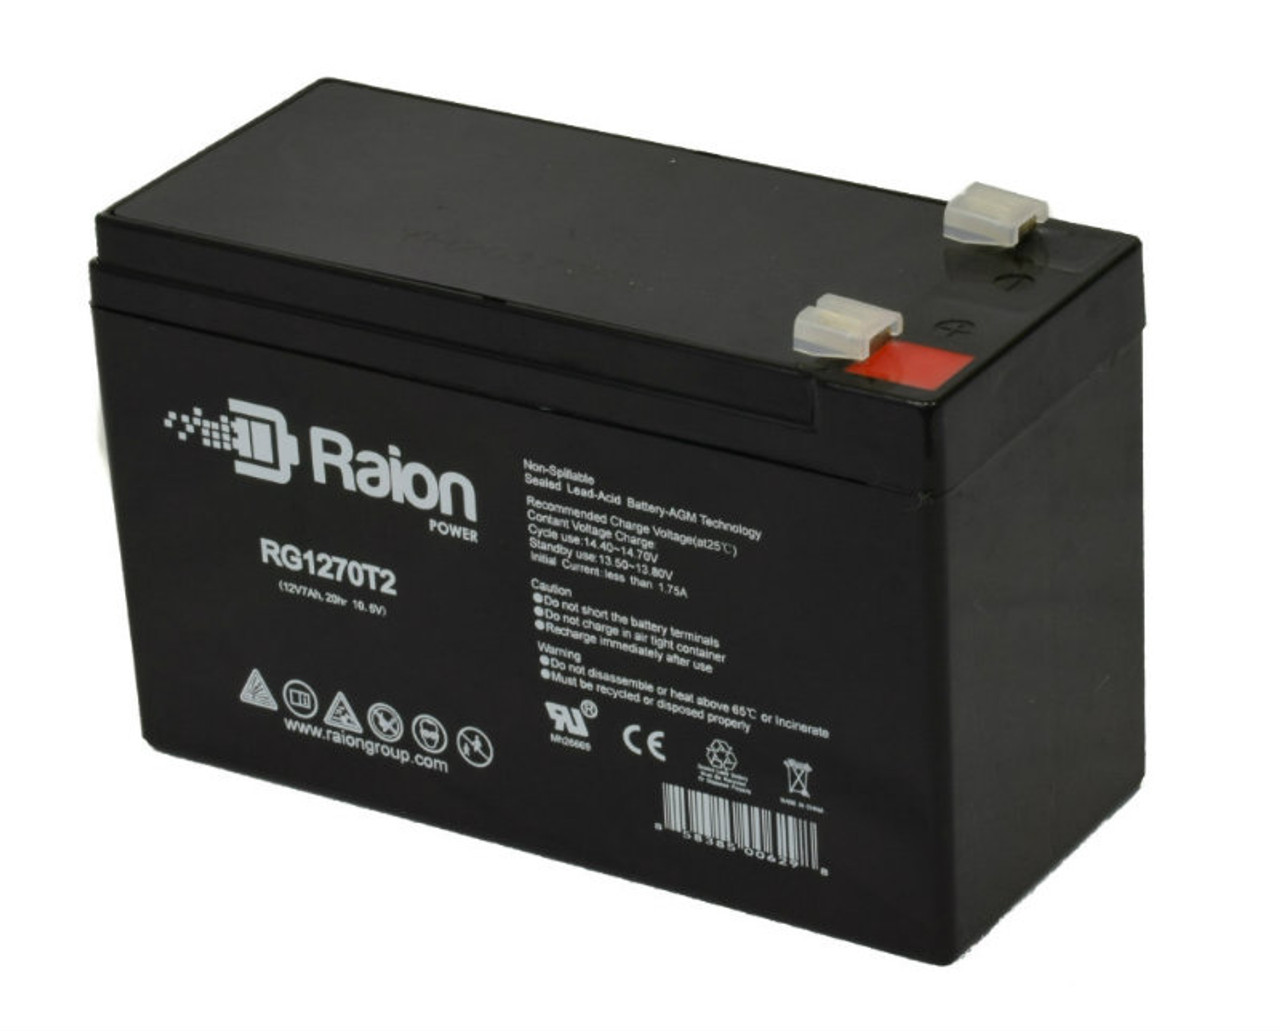 Raion Power RG1270T1 12V 7Ah Non-Spillable Replacement Battery for Tenergy TB1272